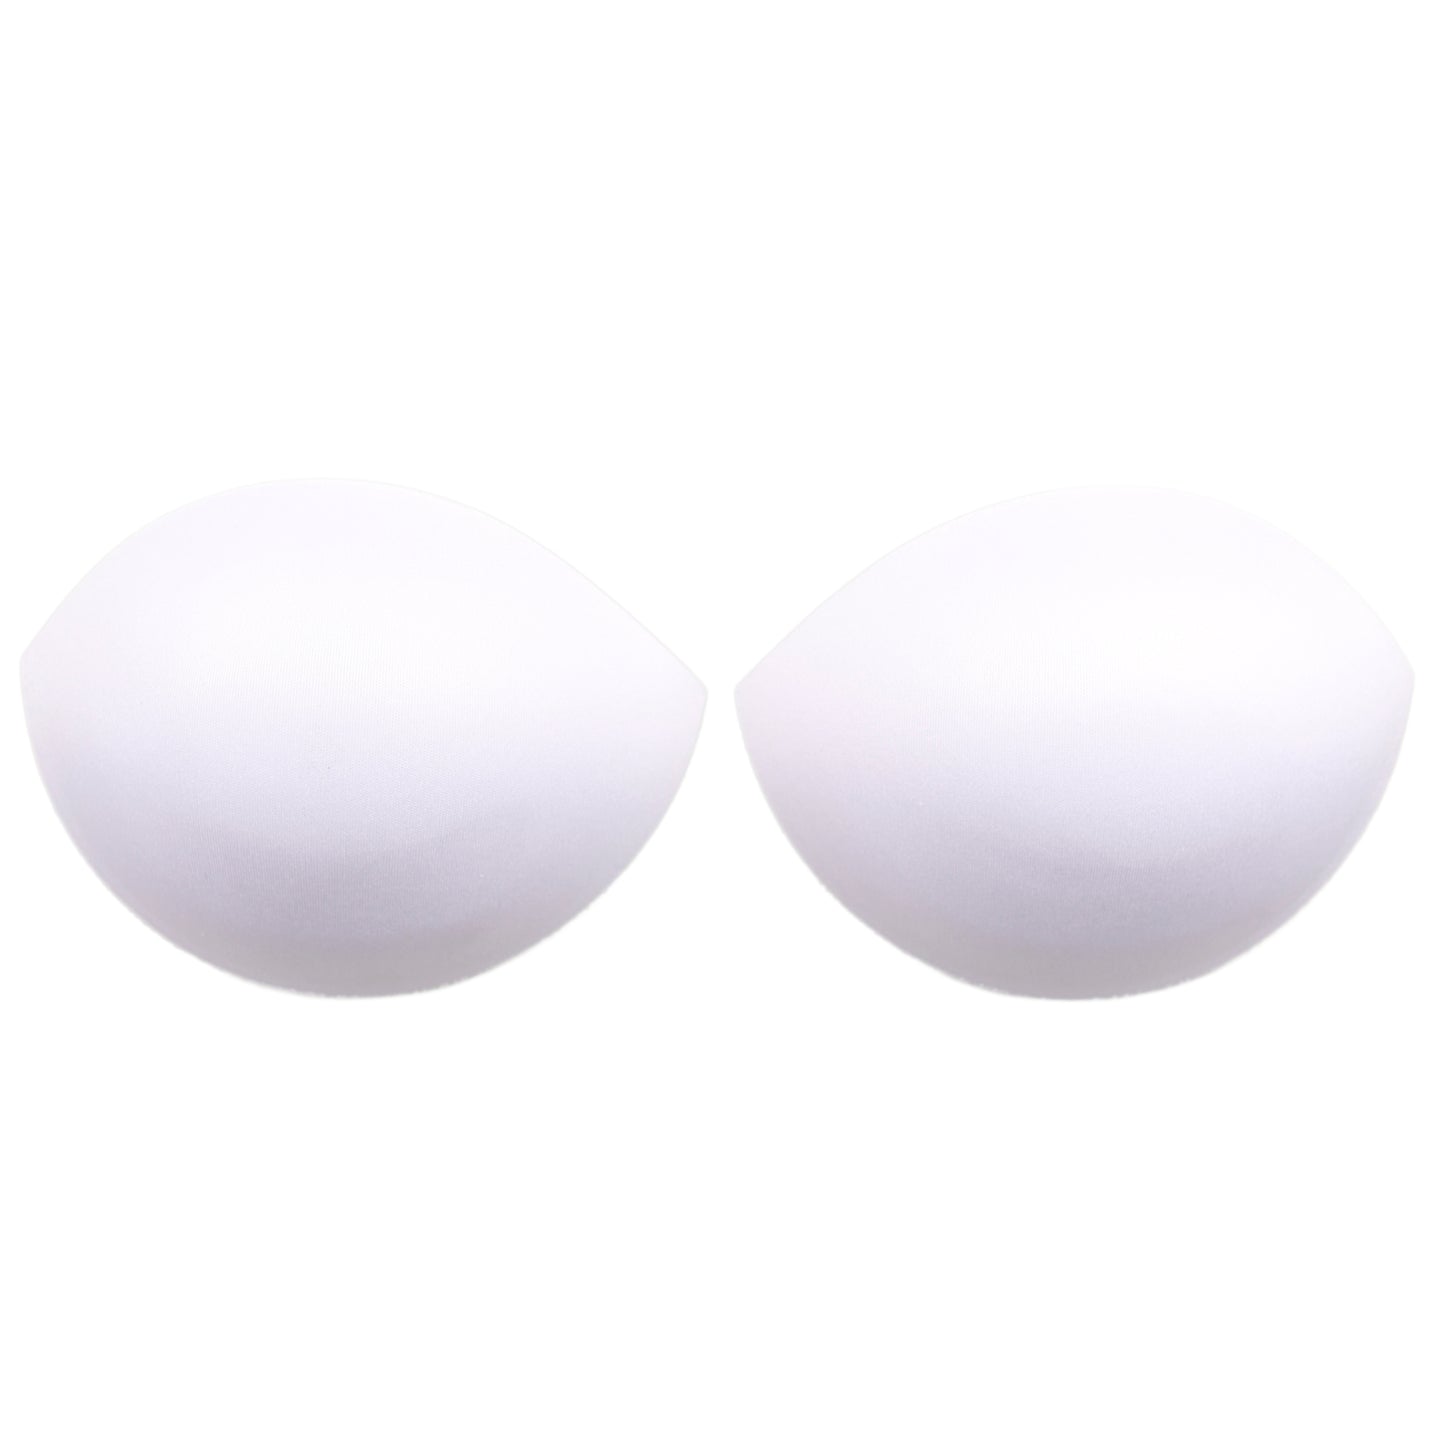 FIRM SOFT-TOUCH PUSH UP BRA CUP WHITE